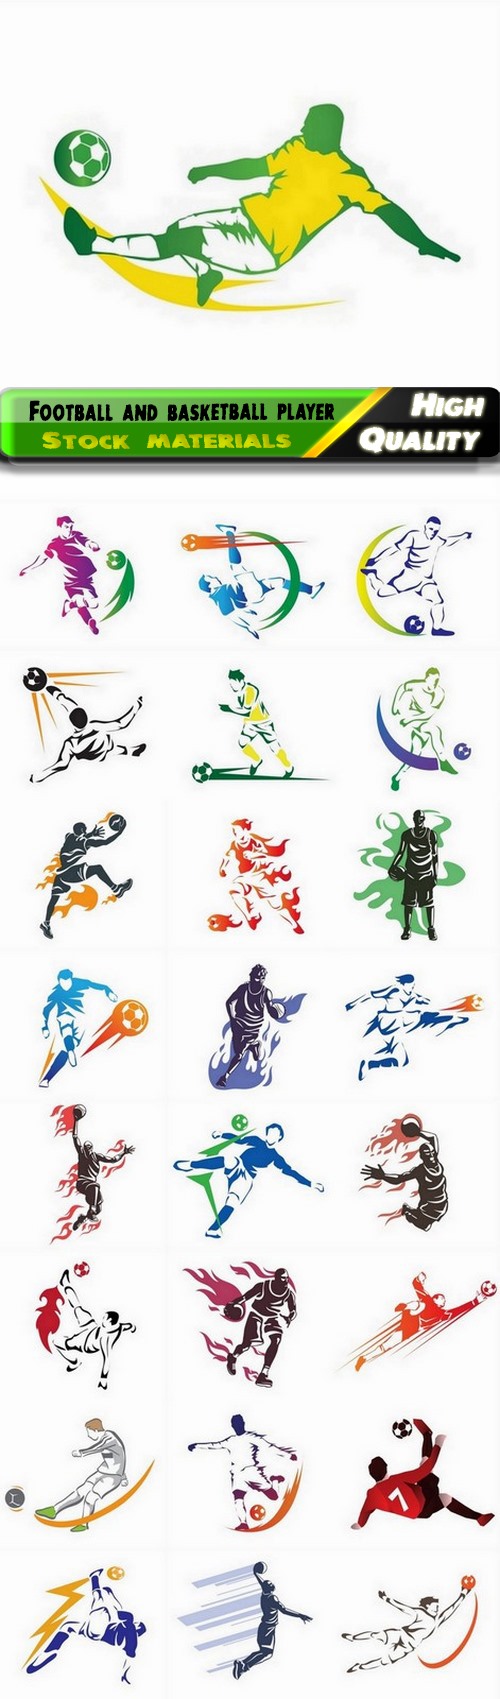 Colorful silhouette of a football and basketball player in motion - 25